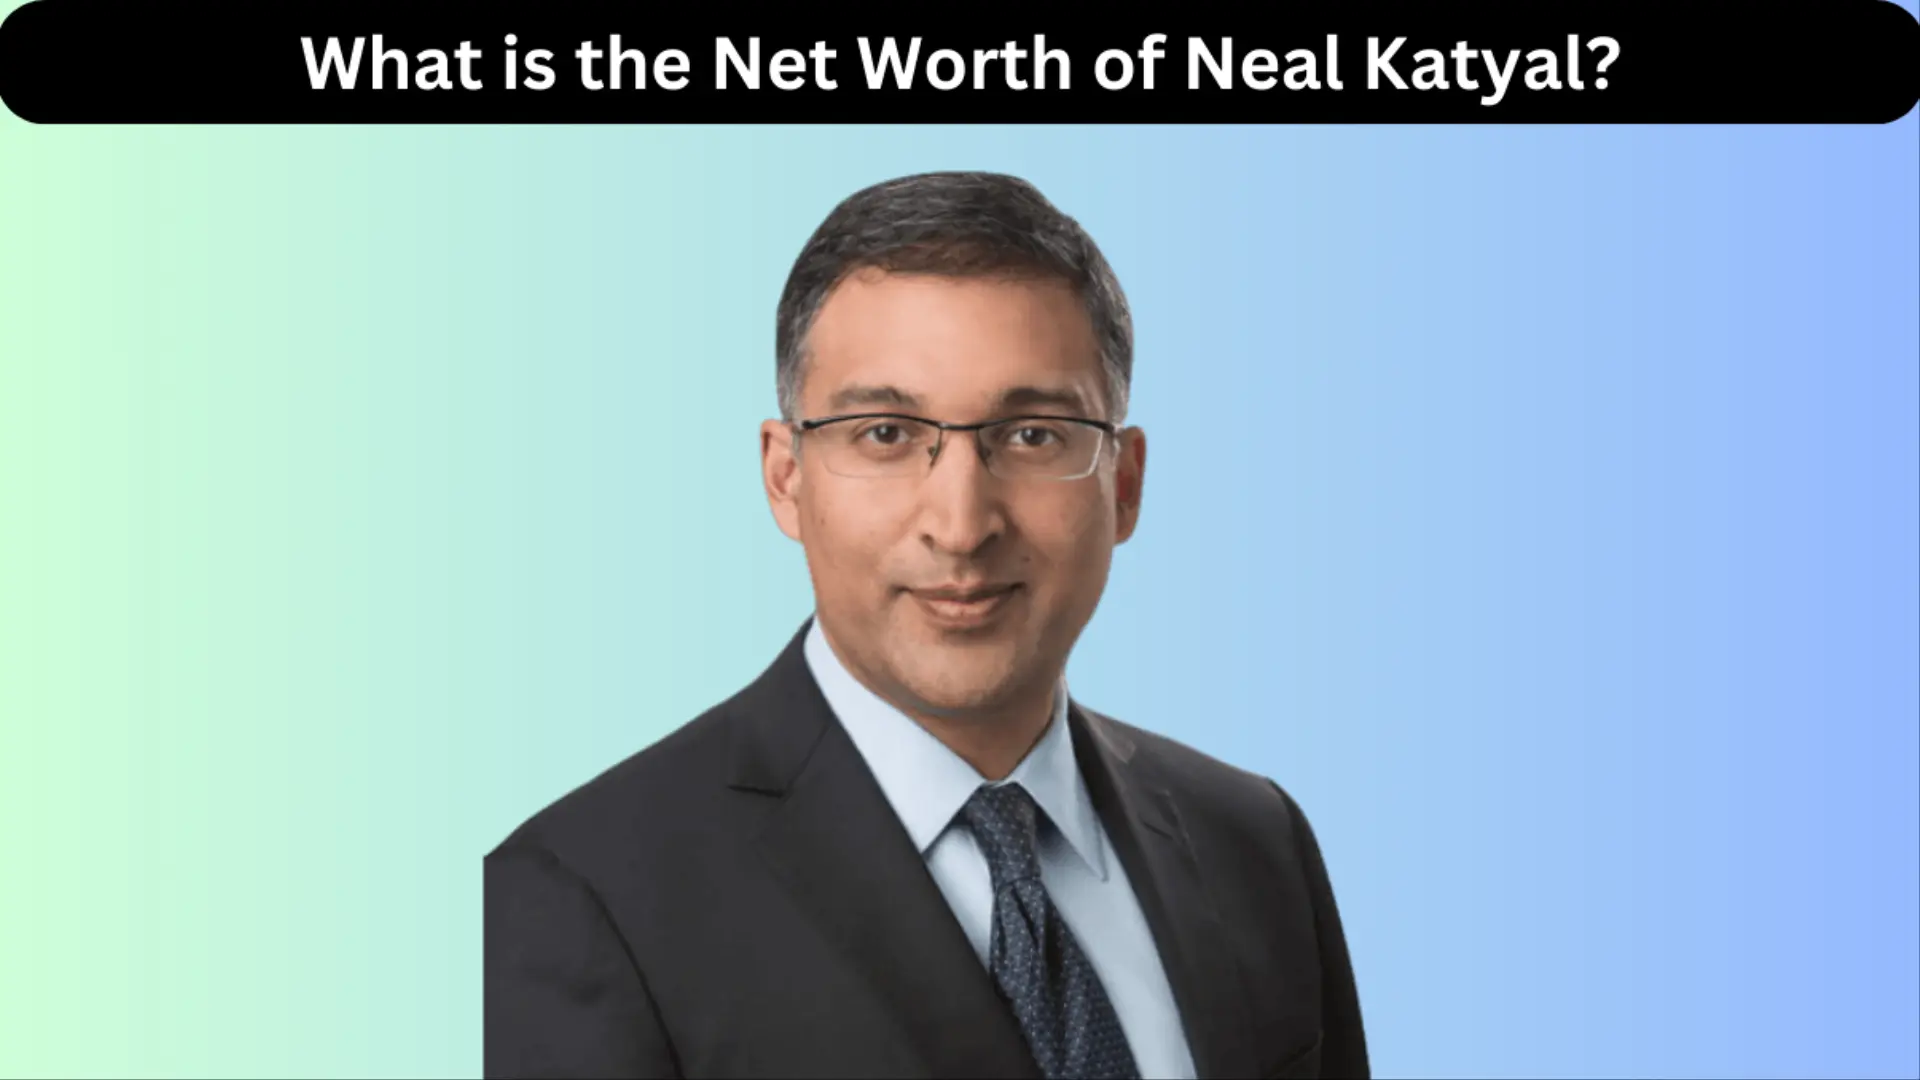 What is the Net Worth of Neal Katyal